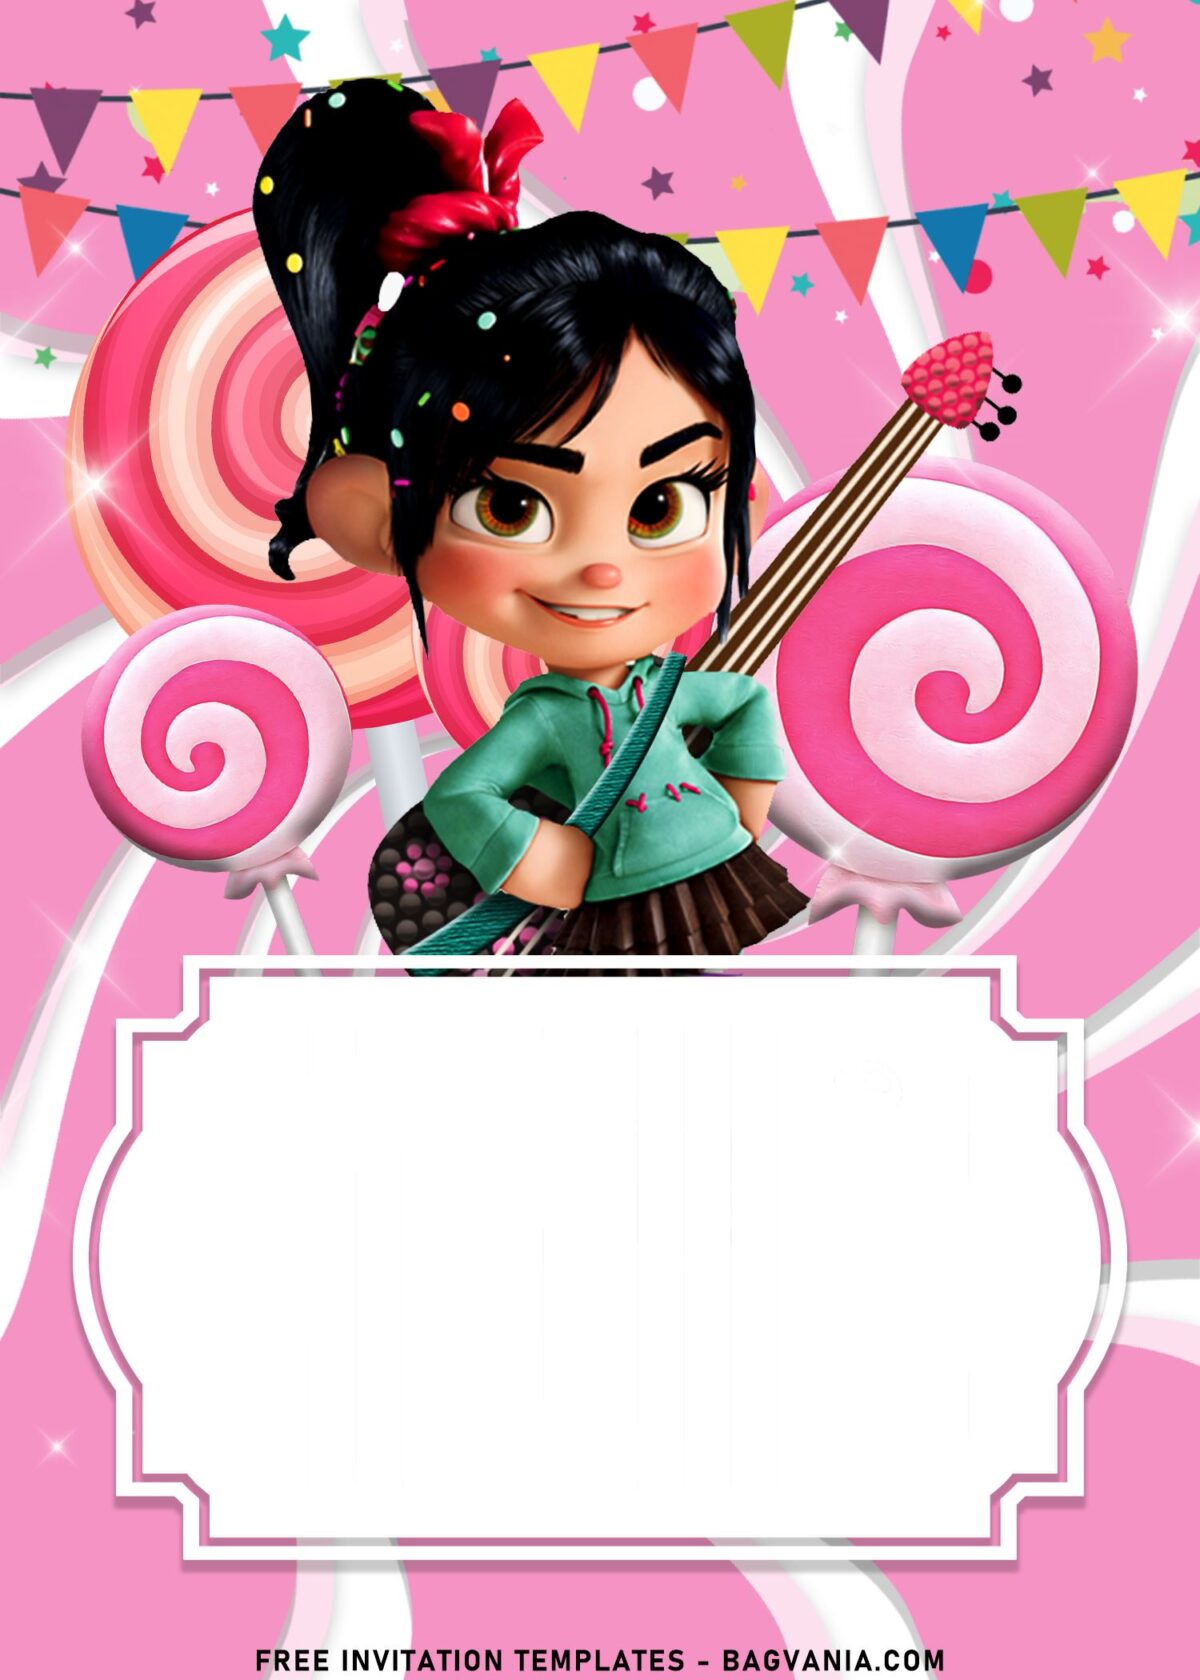 9+ Girly Vanellope Birthday Invitation Templates Great For All Ages with Cute Pink Swirled background